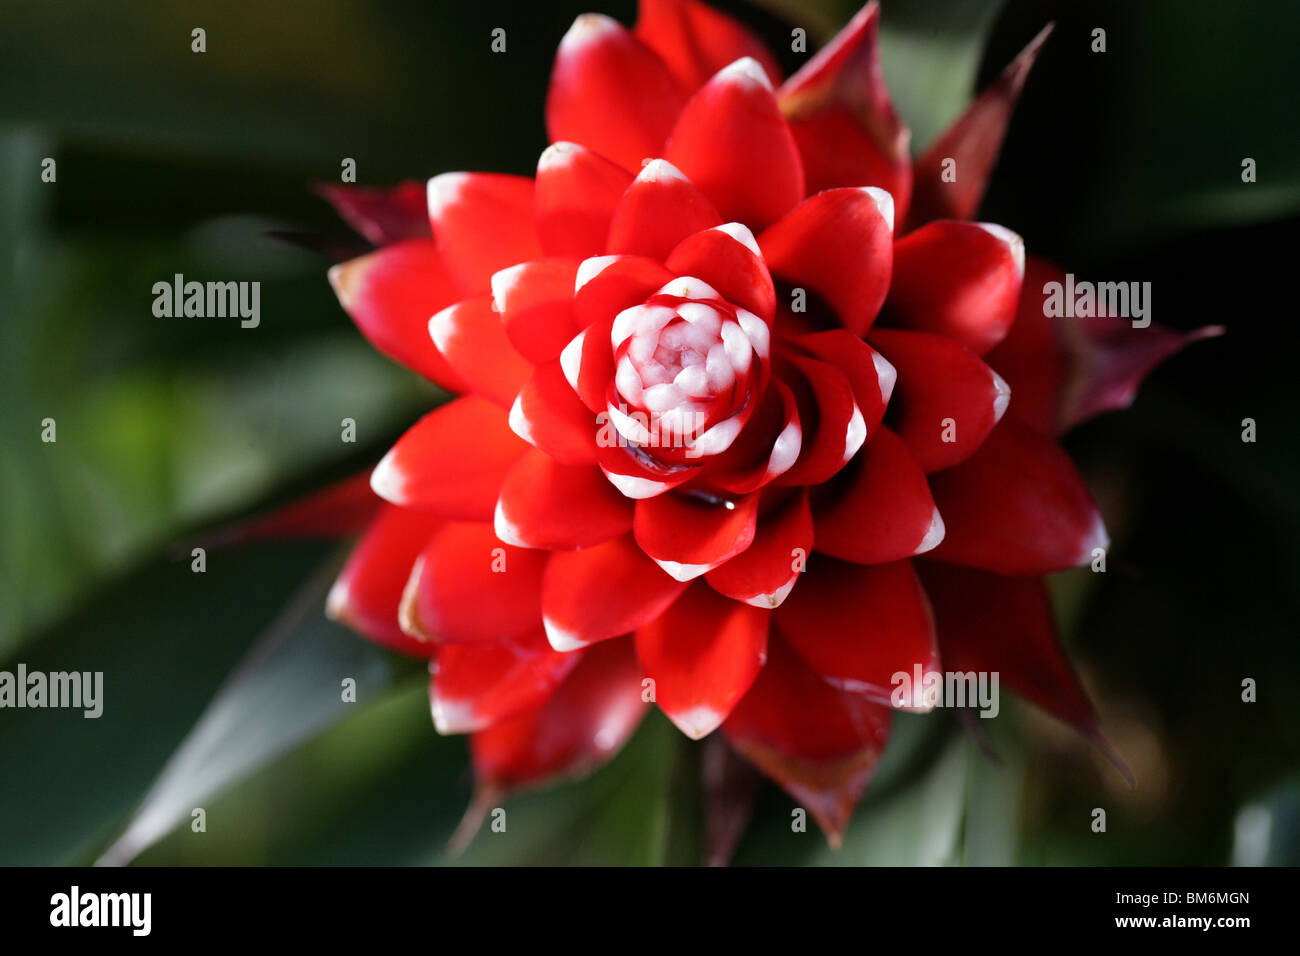 Red and White Spotted Guzmania, Commercial Hybrid Bromeliad, Bromeliaceae. Stock Photo